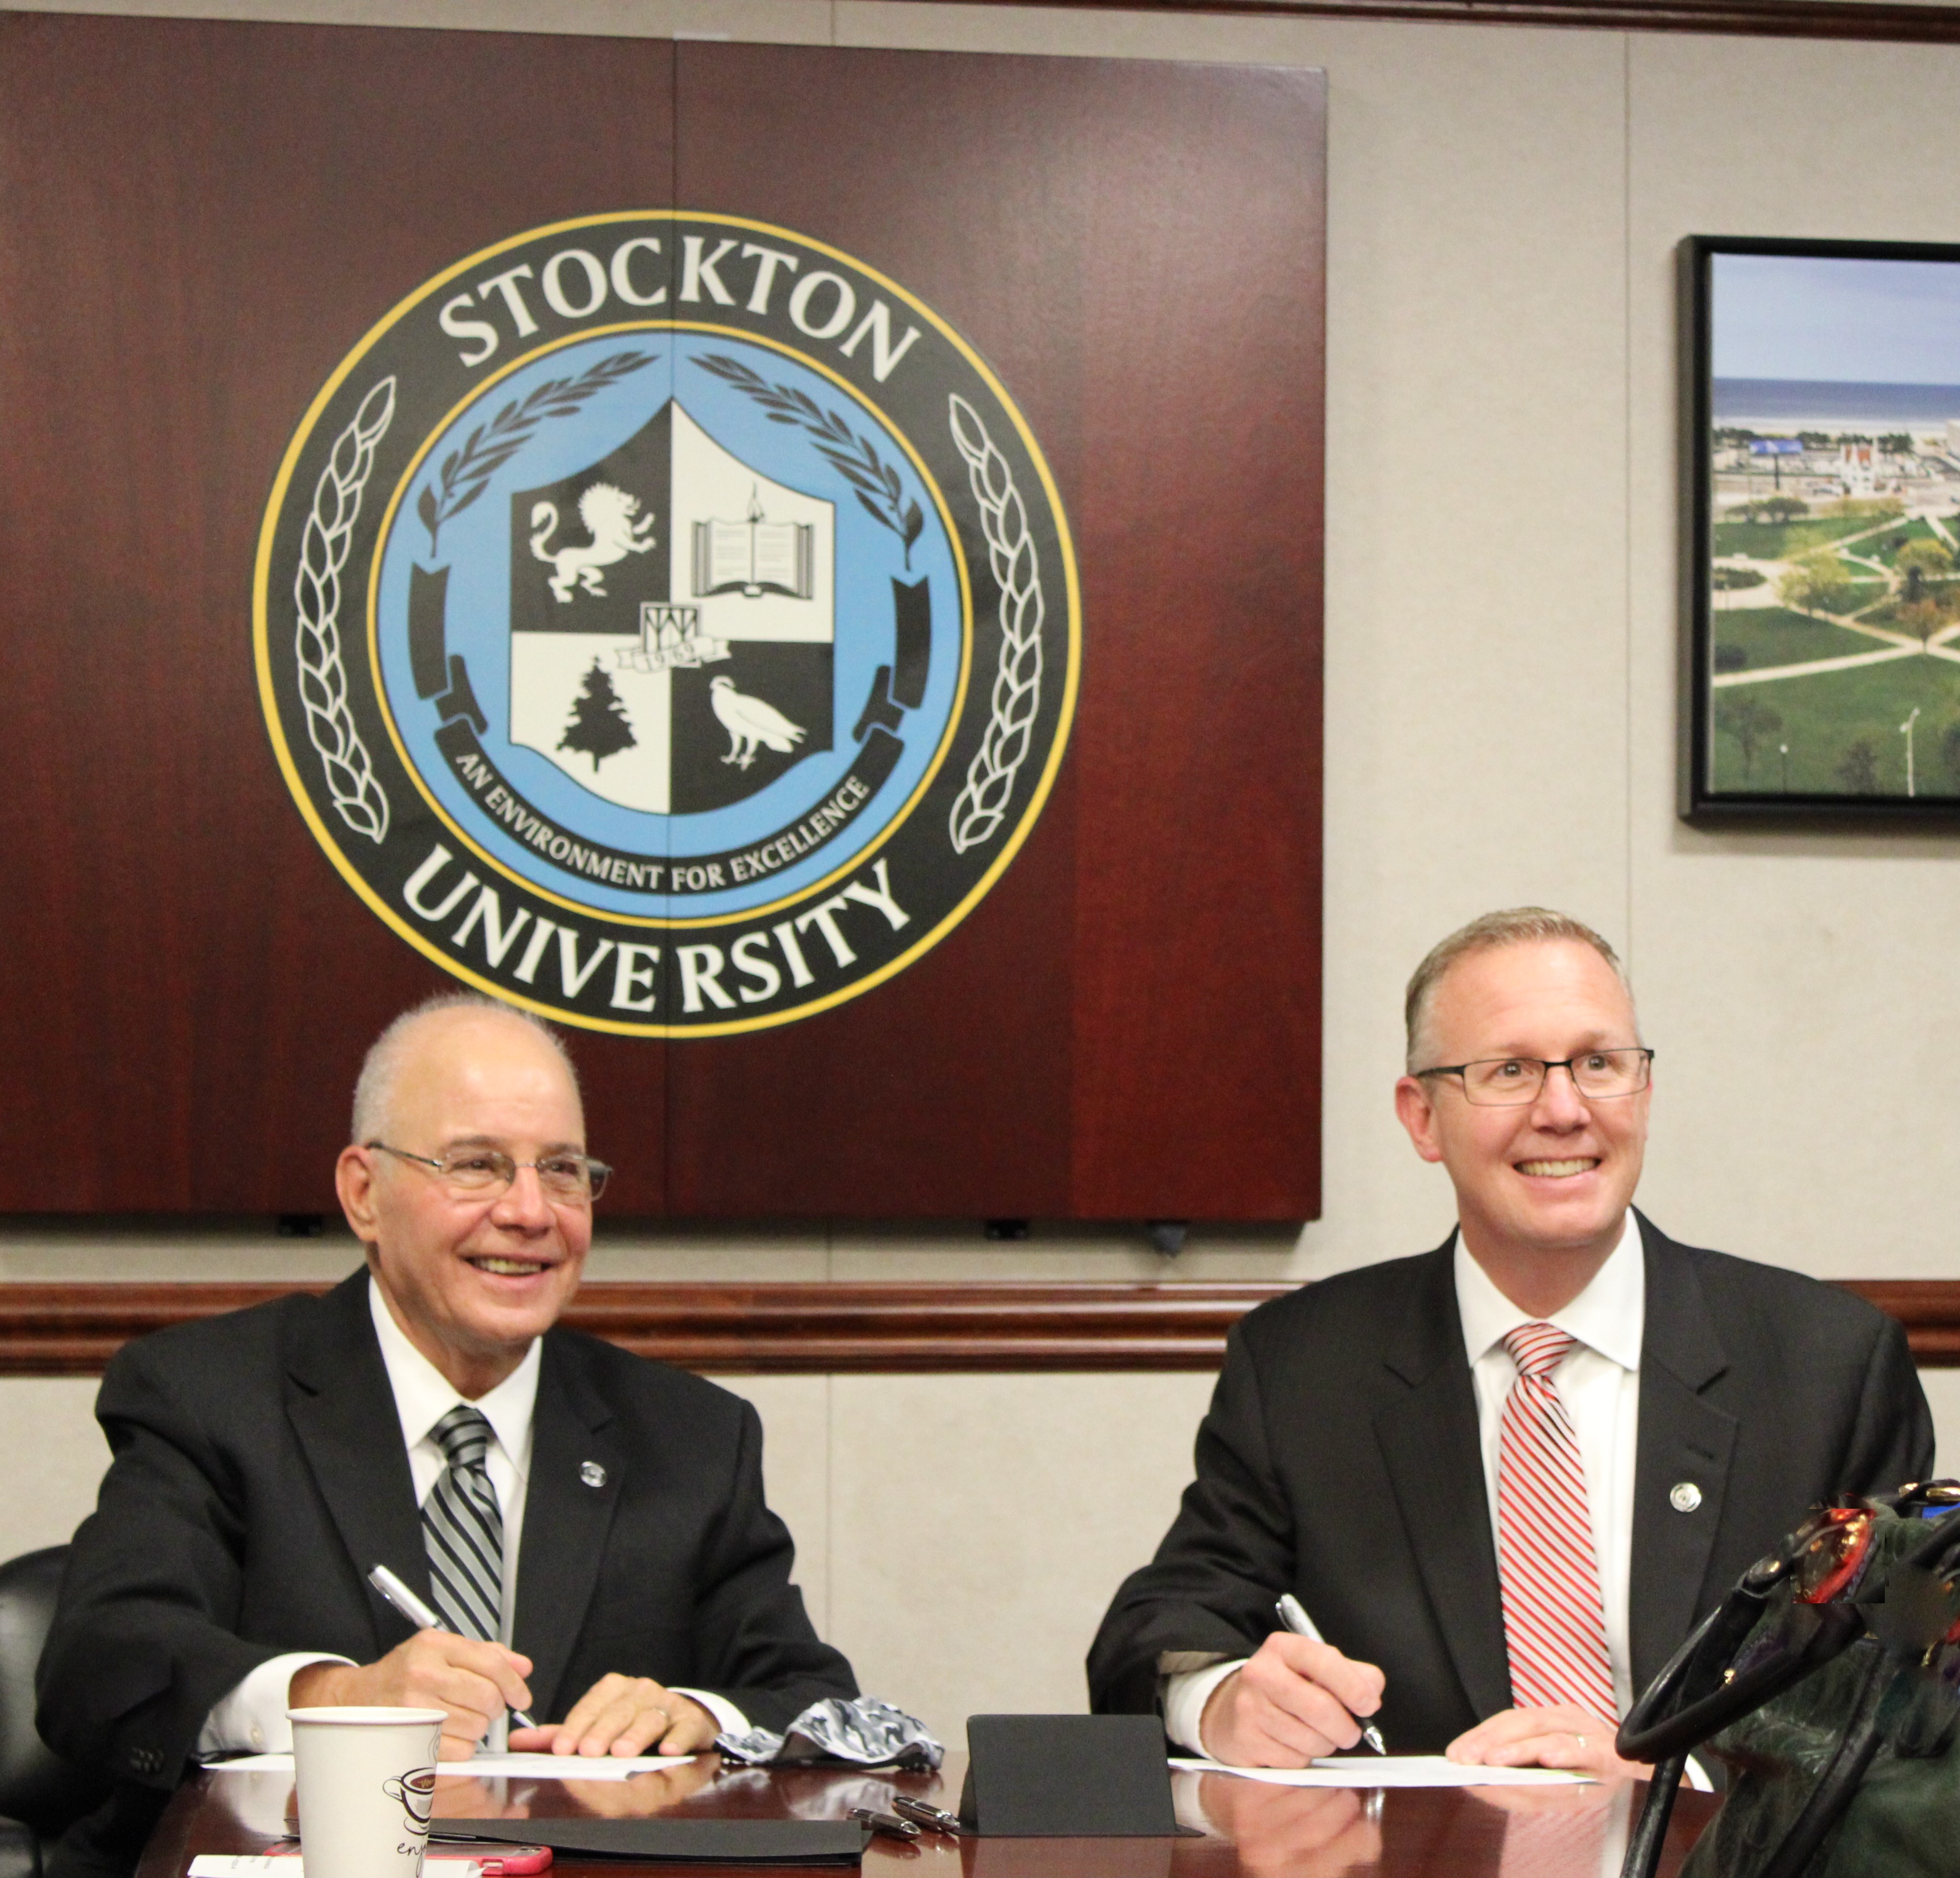 Dr. McBride signing the agreement with Stockton University for ECHS with university president, Dr. Kesselman